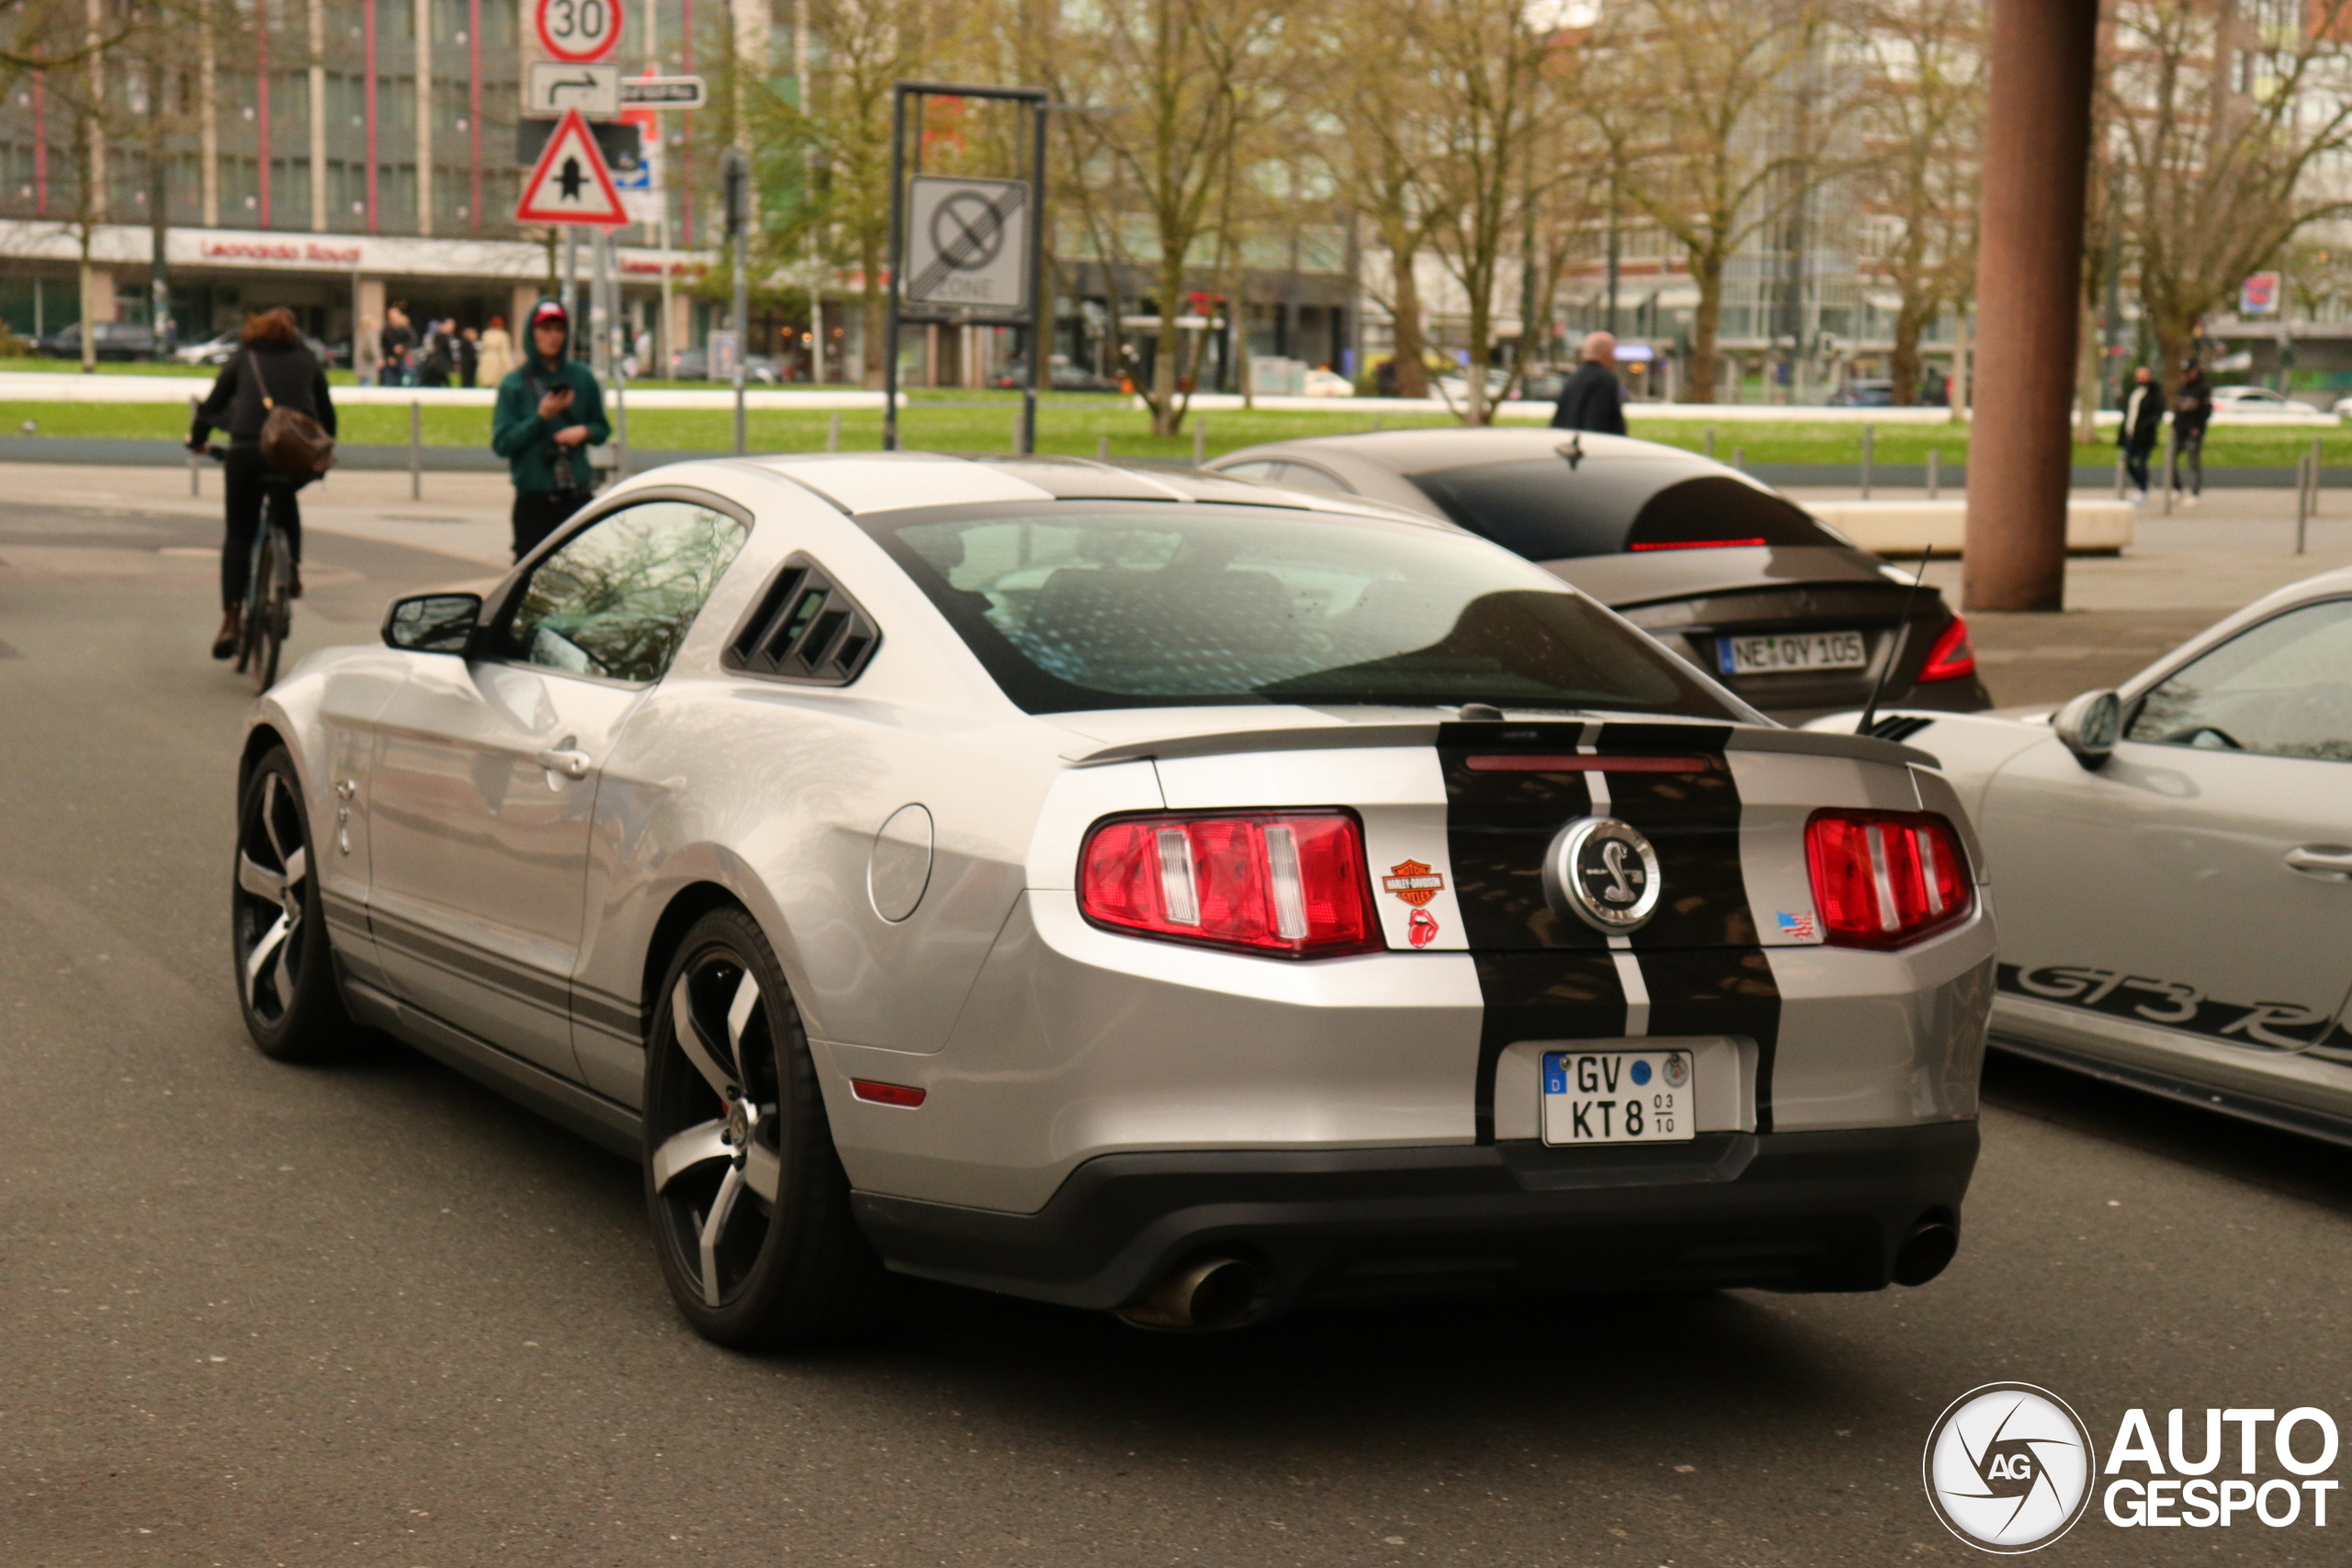 Ford Mustang Shelby GT500